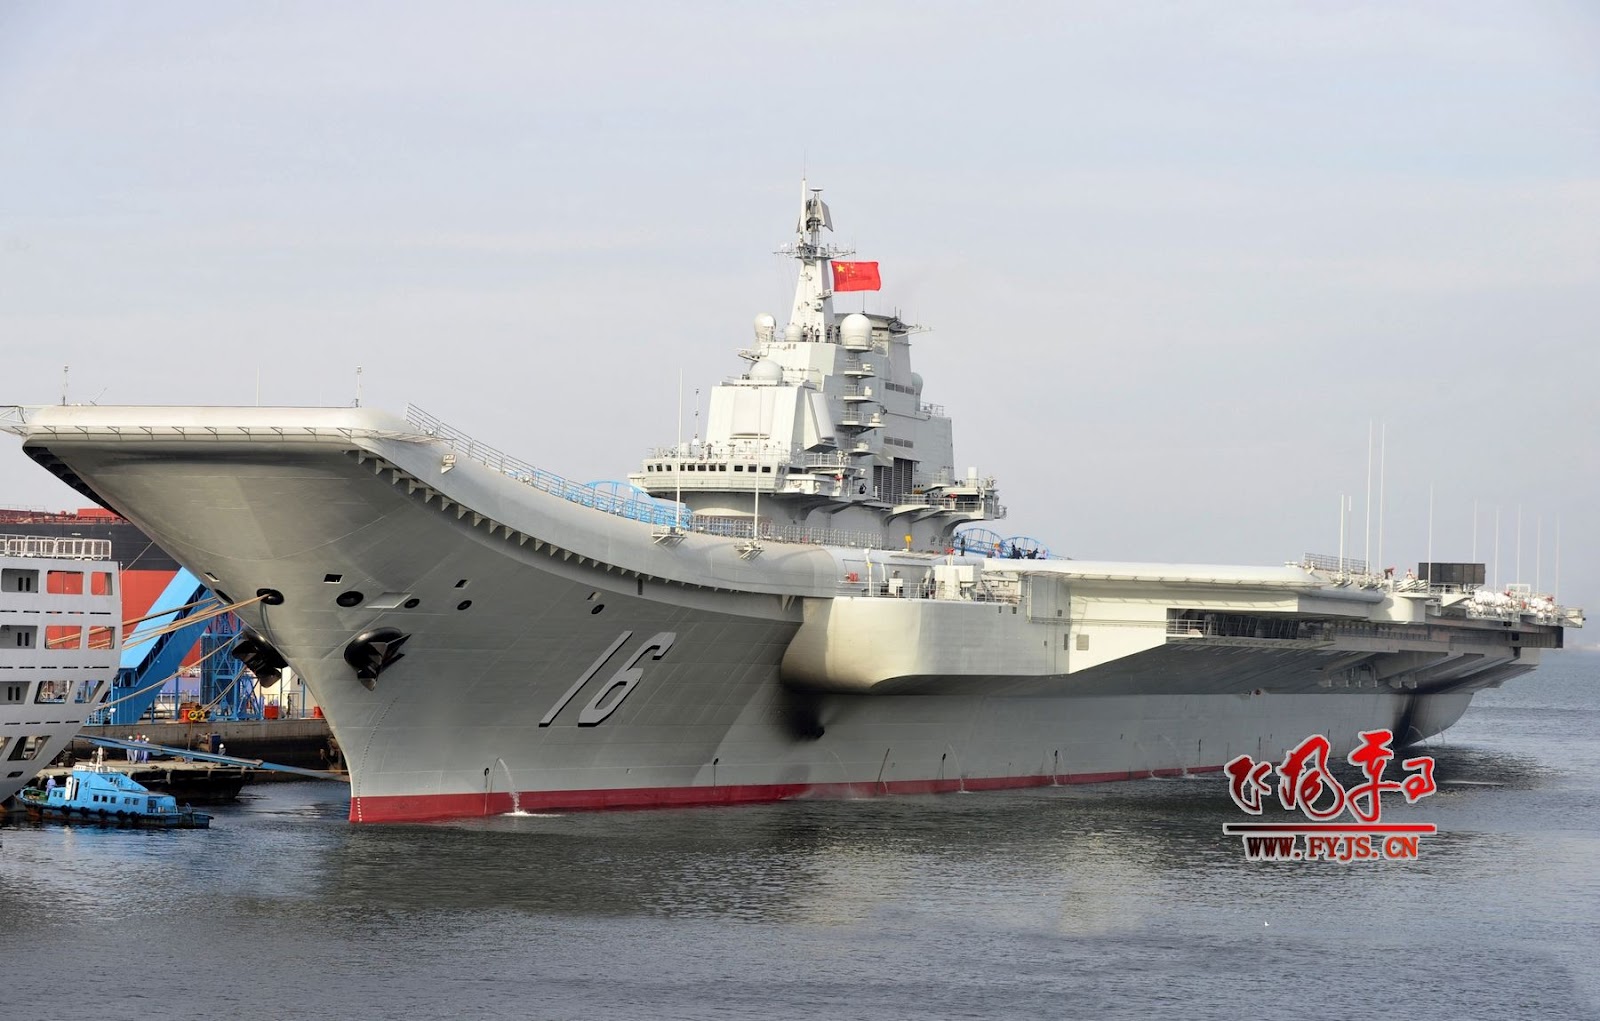 China+Inducts+Its+First+Aircraft+Carrier+Liaoning+CV16+j-15+16+17+22+21+31+z8+9+10+11+12+13fighter+jet+aewc+%252810%2529.jpg